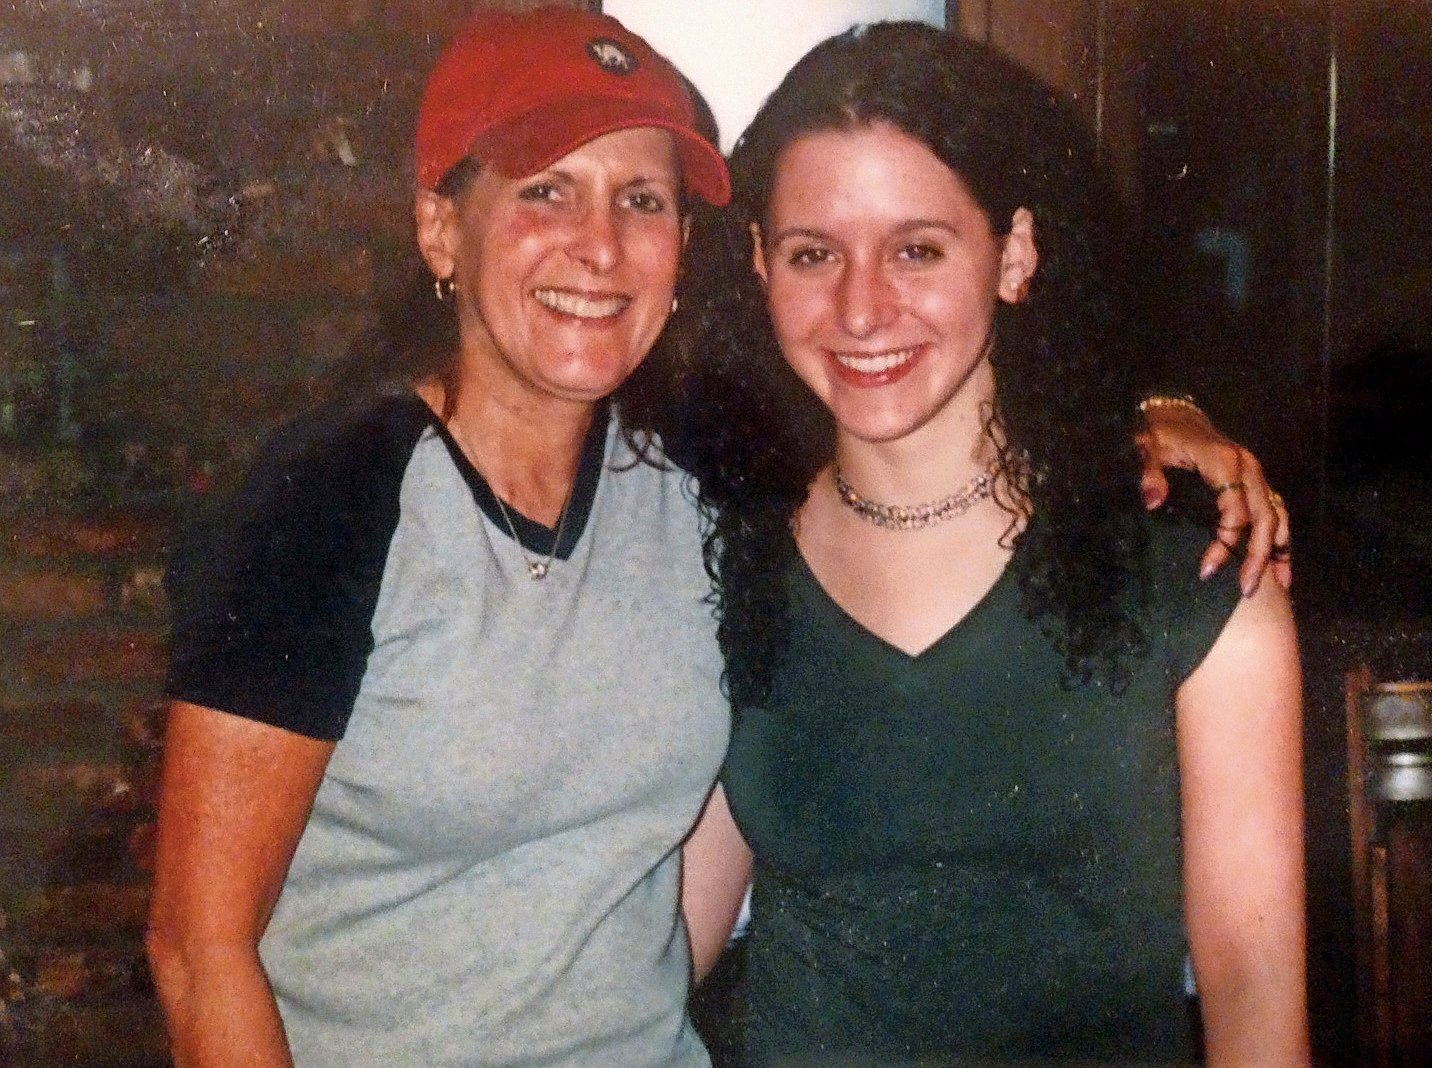 Marisa Bardach Ramel, right, grew up in Oceanside and co-wrote a memoir with her mother, Sally Bardach, who died from pancreatic cancer in 2002.